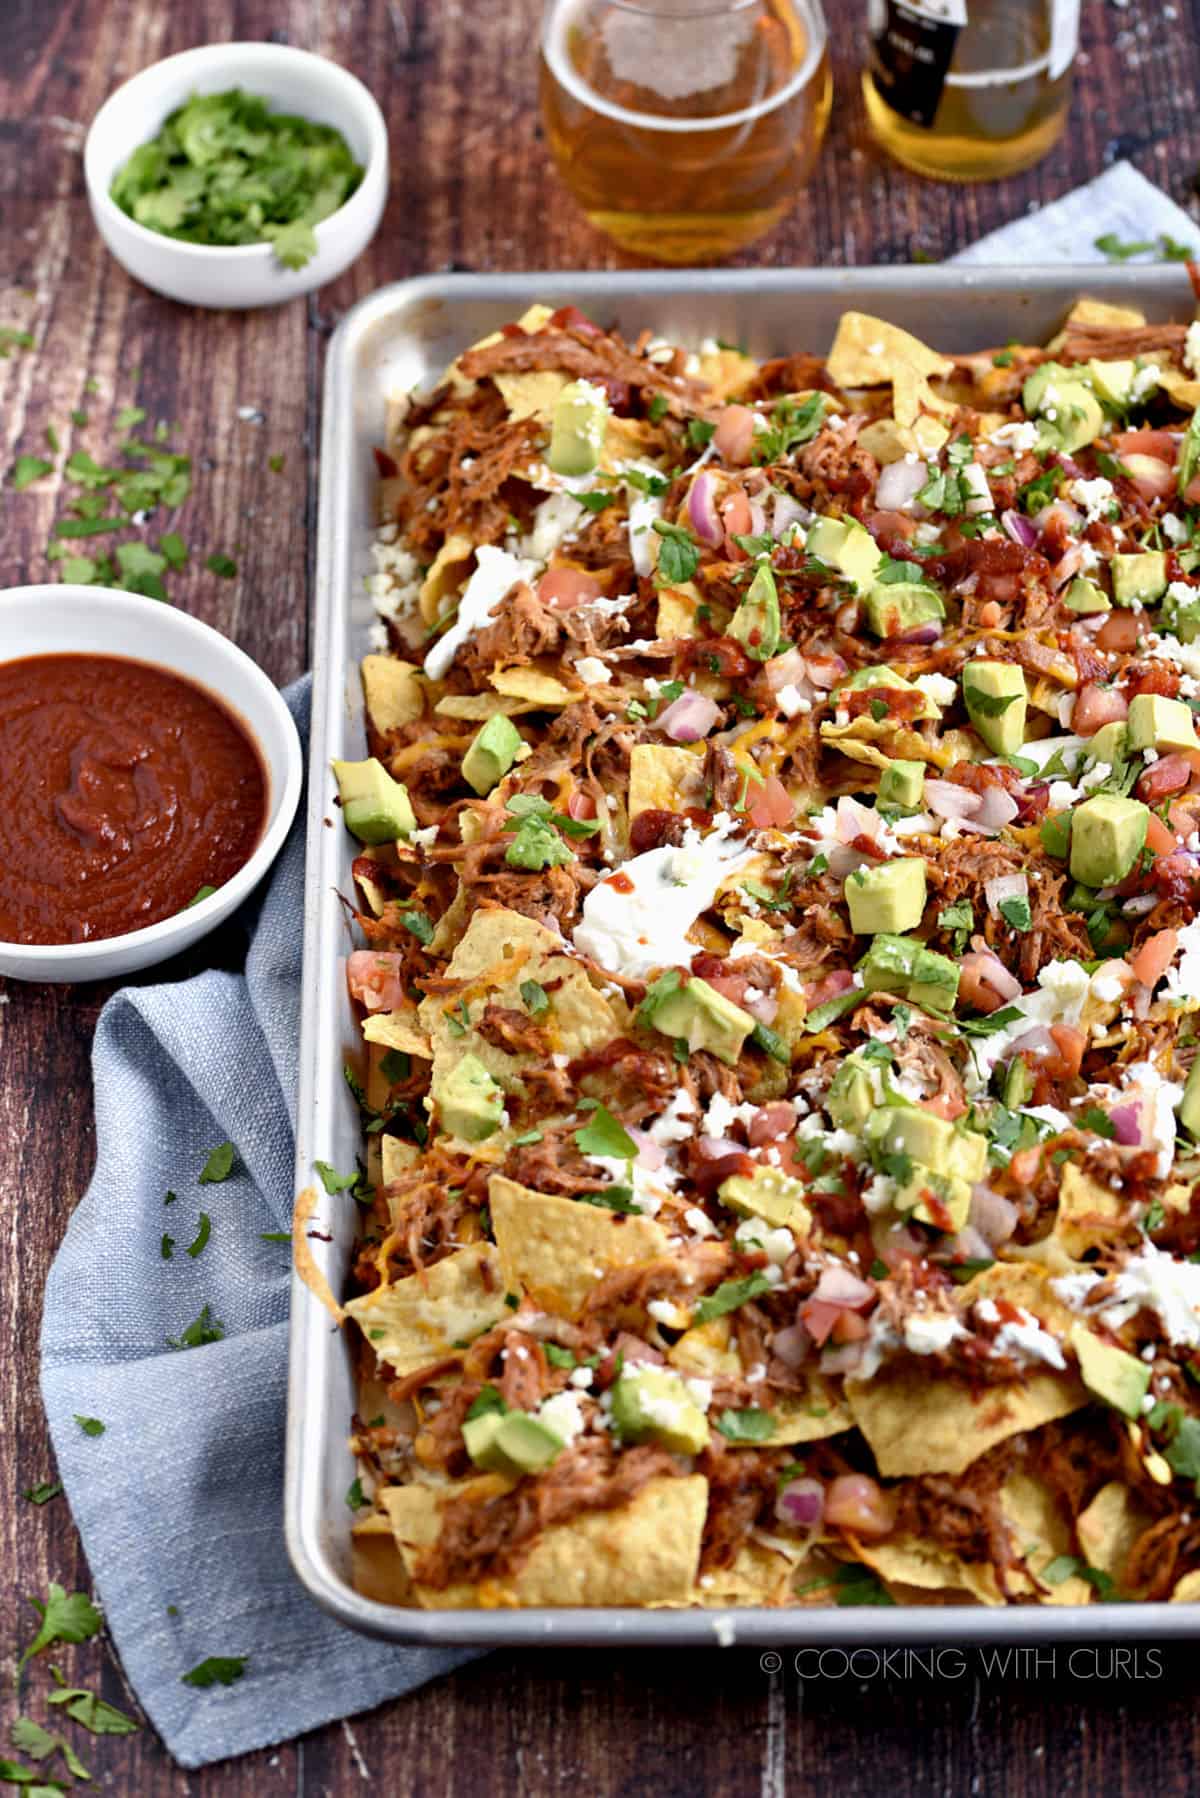 Tortilla chips, pulled pork, melted cheese, diced avocado, sour cream and barbecue sauce in a baking sheet with bowls of barbecue sauce, and chopped cilantro in the background.